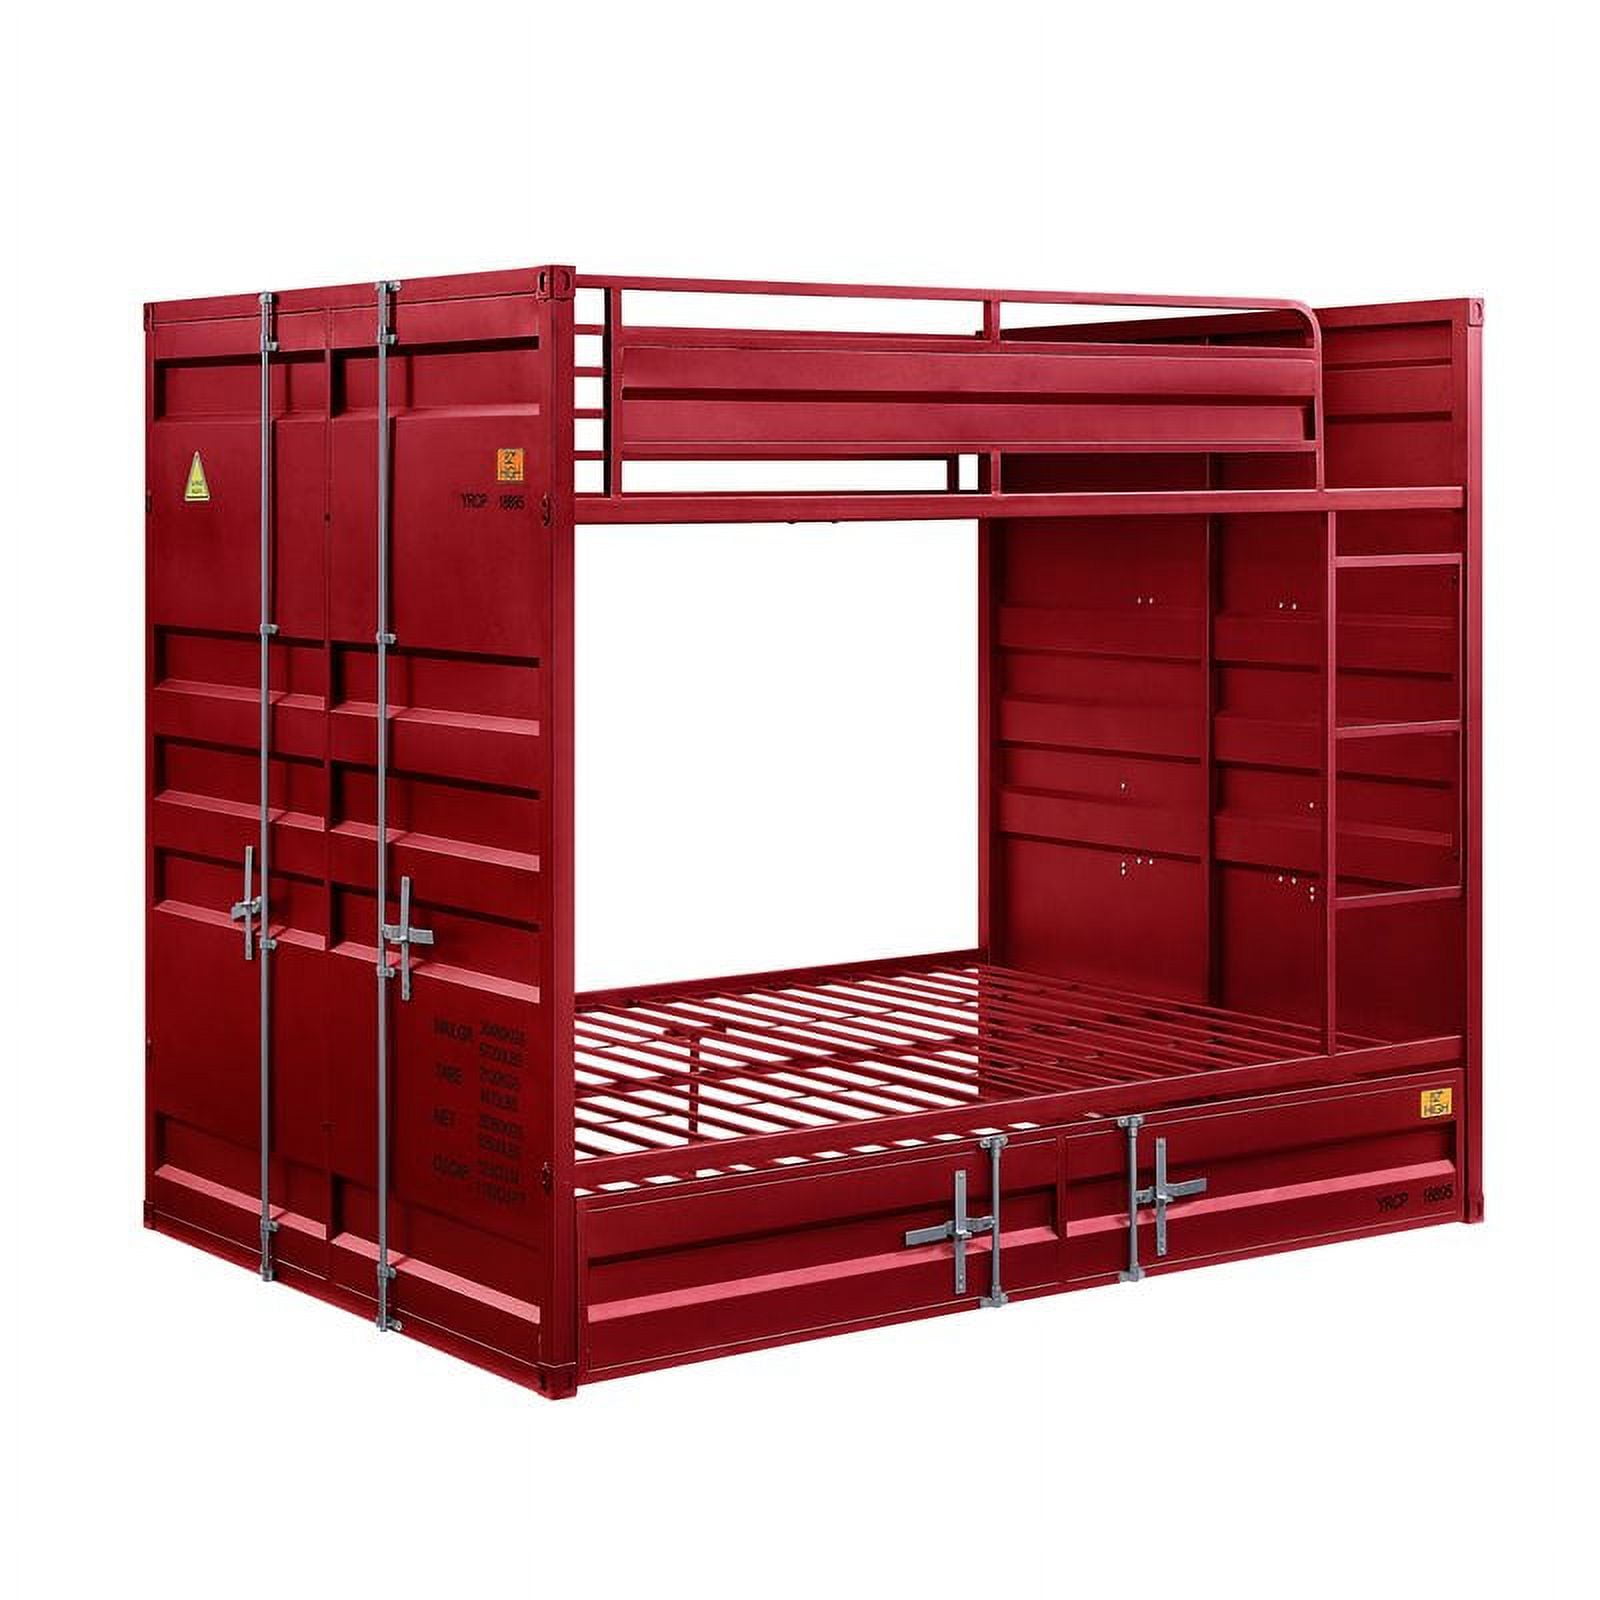 Picture of ACME Furniture 37915 78 x 56 x 65 in. Cargo Bunk Bed, Red - Full Size